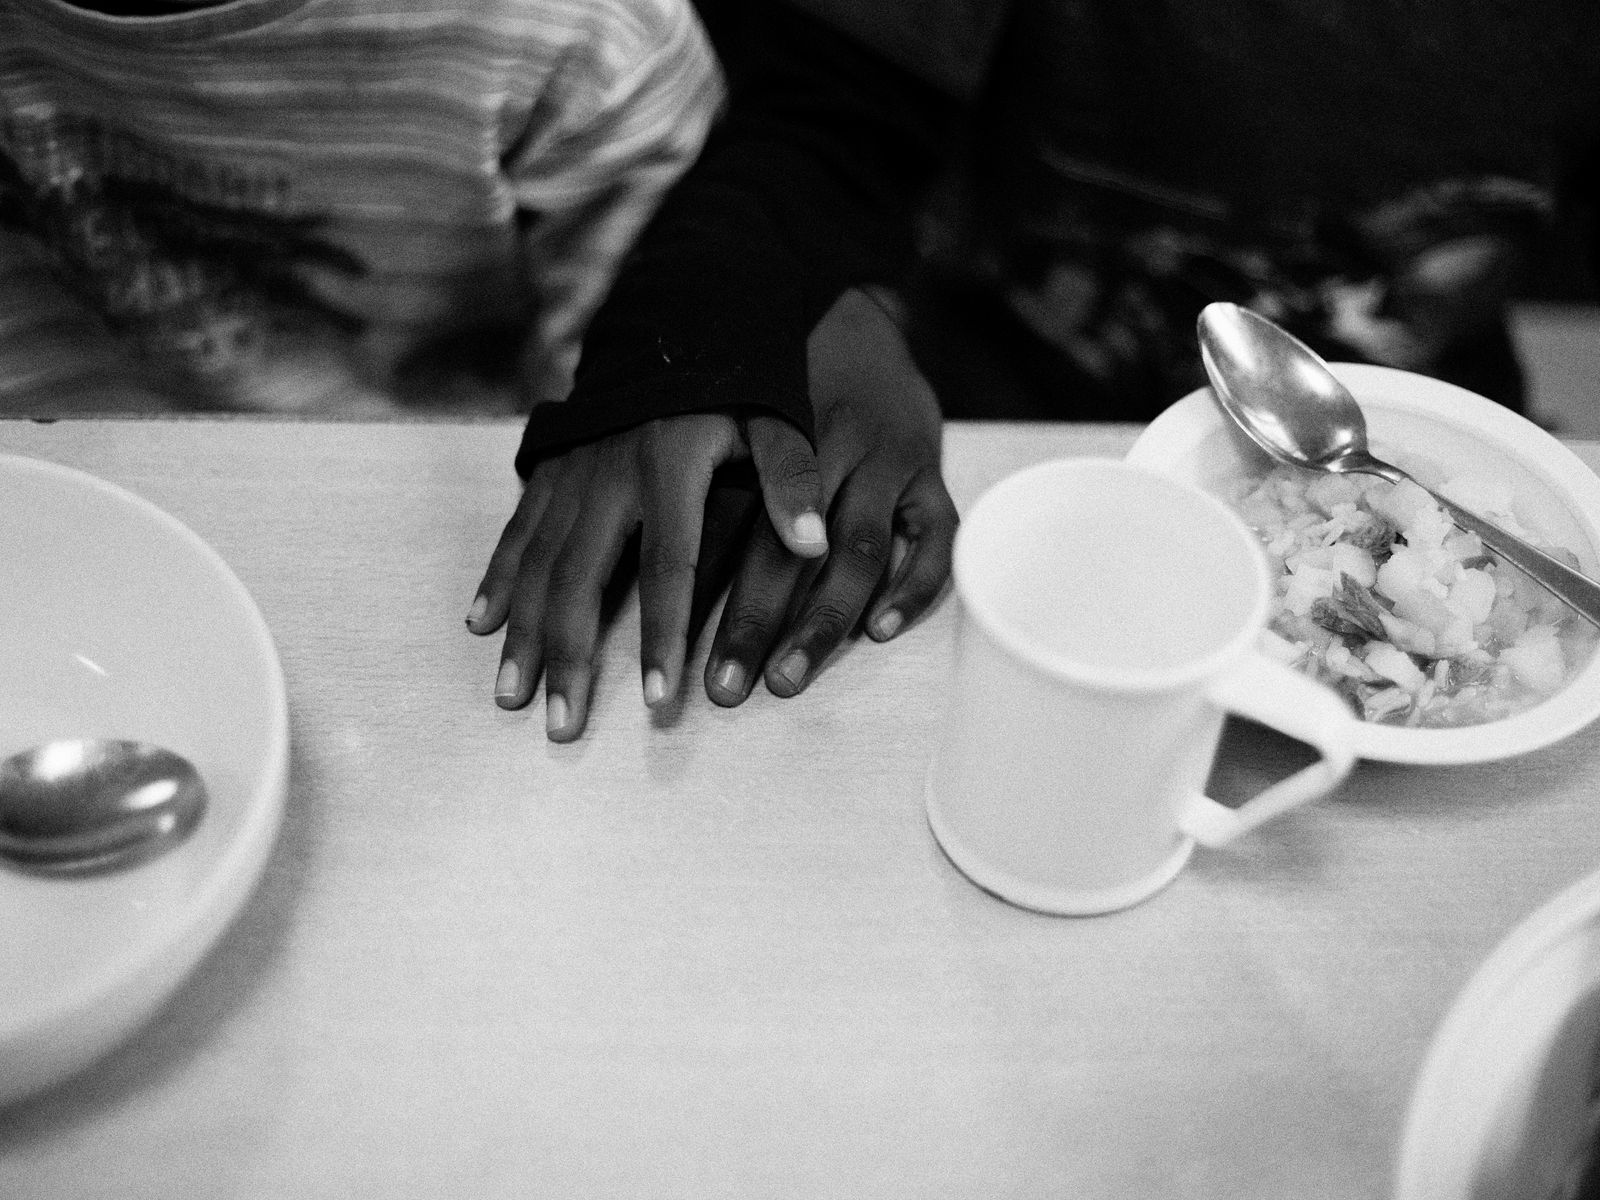 © Toby Binder - Friendship and solidarity in the dining room of the children's home.